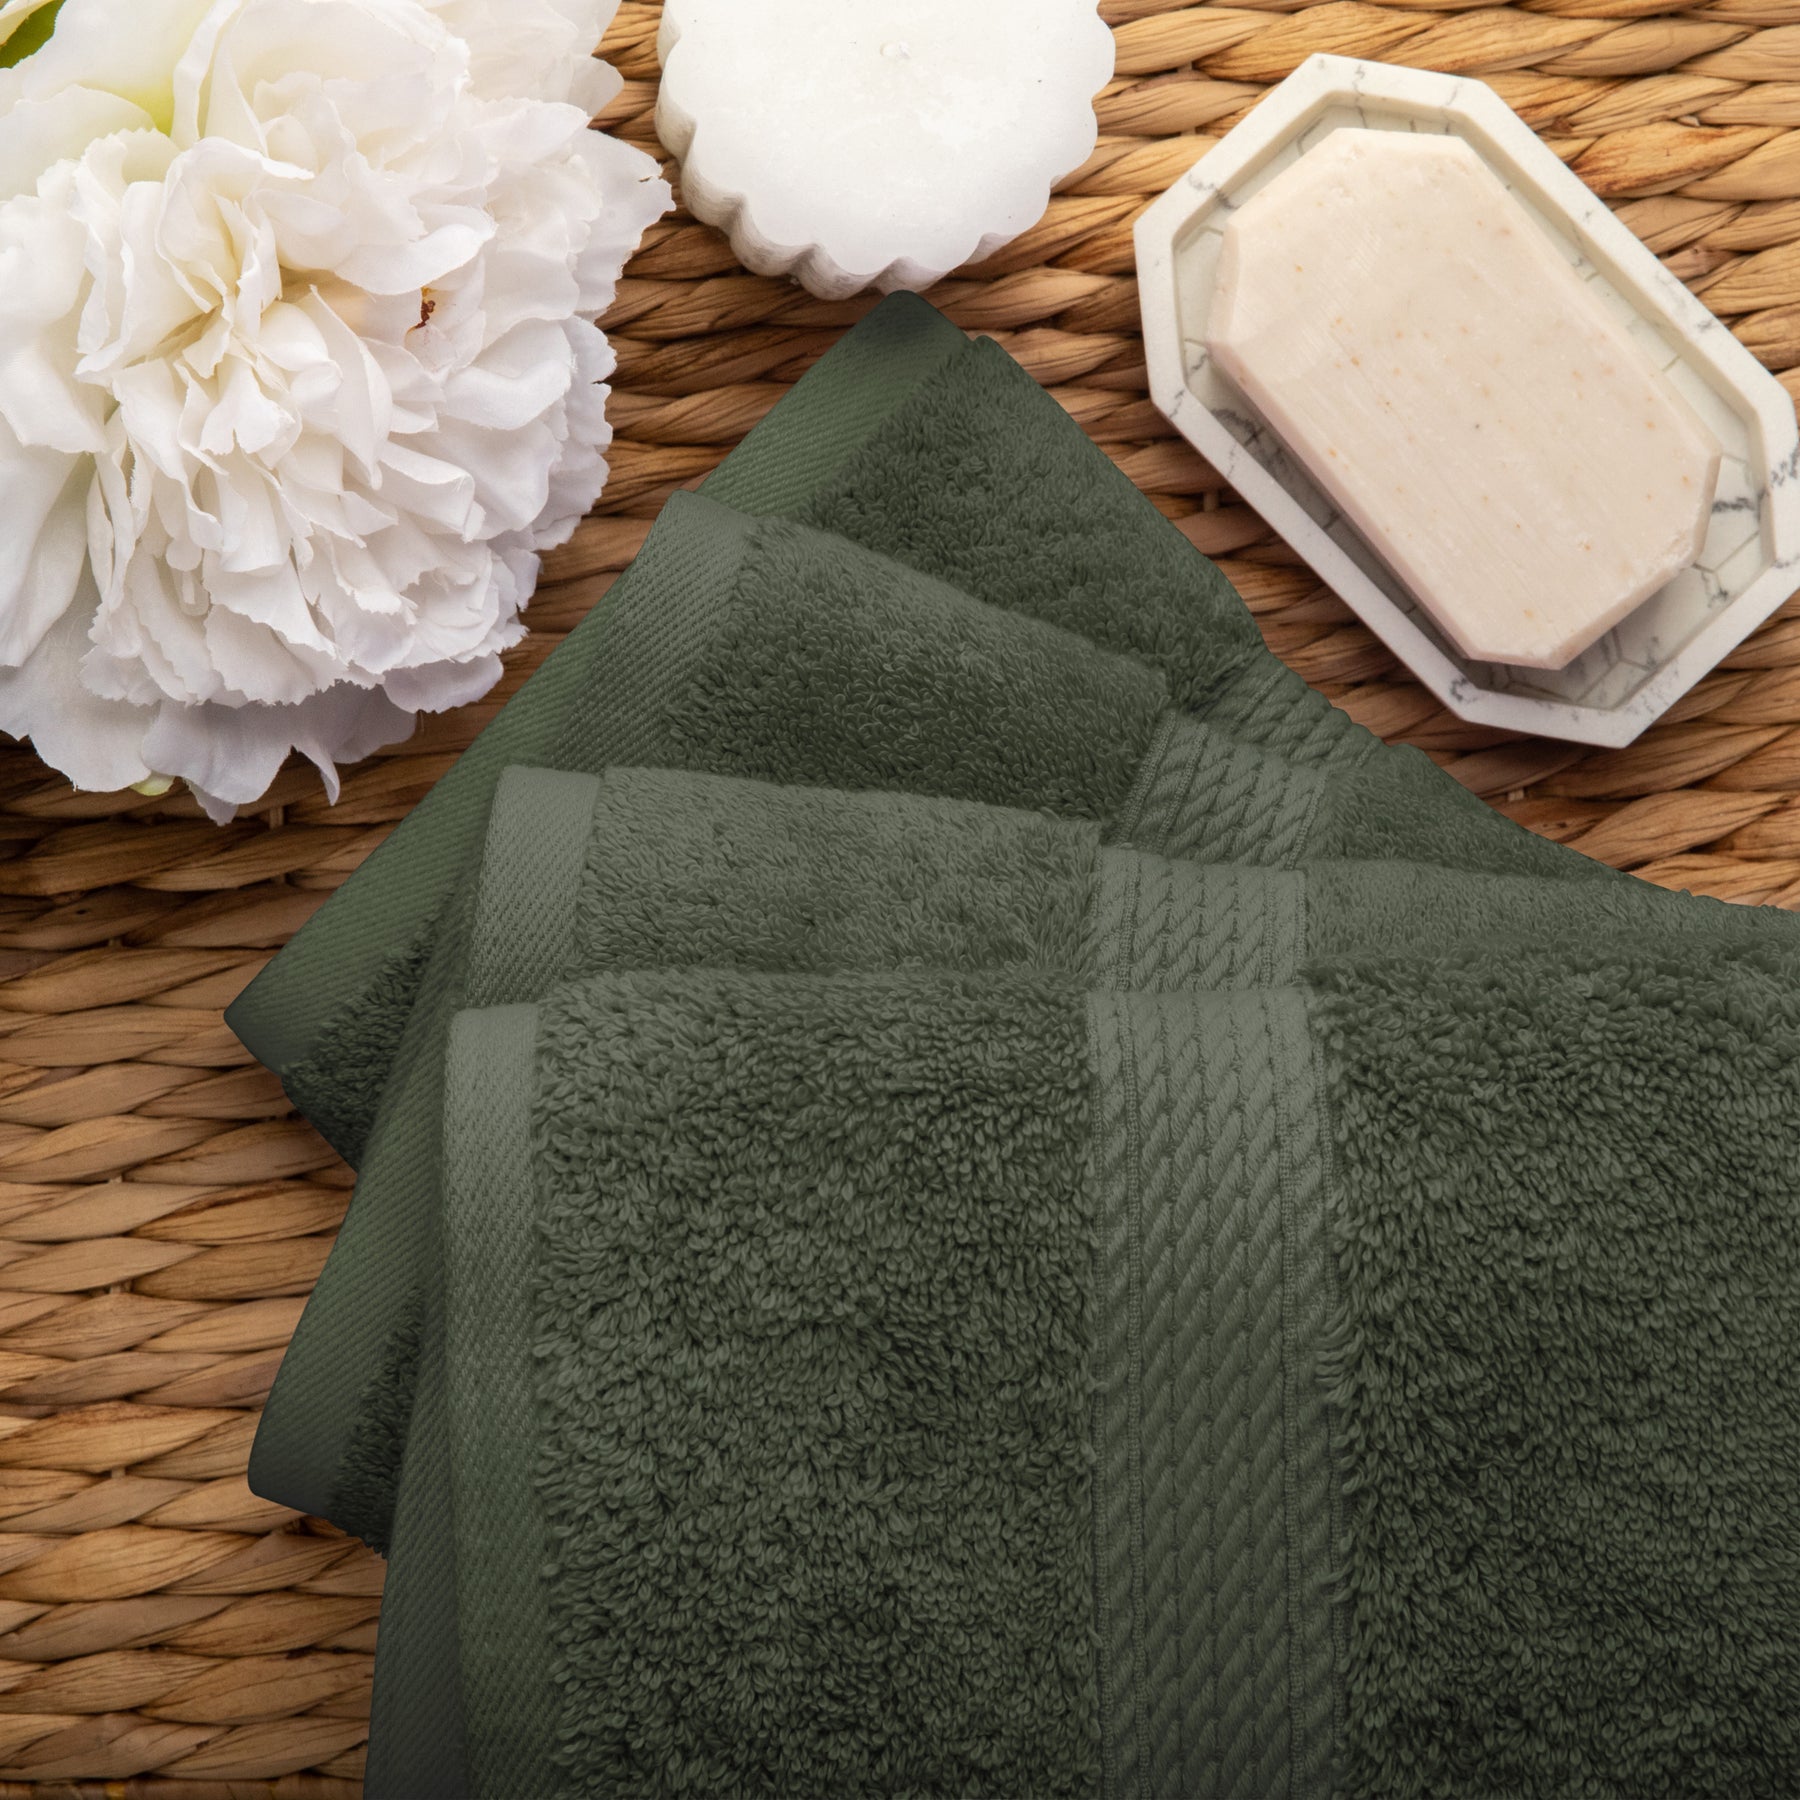 Solid Egyptian Cotton 4 Piece Hand Towel Set - Forest Green